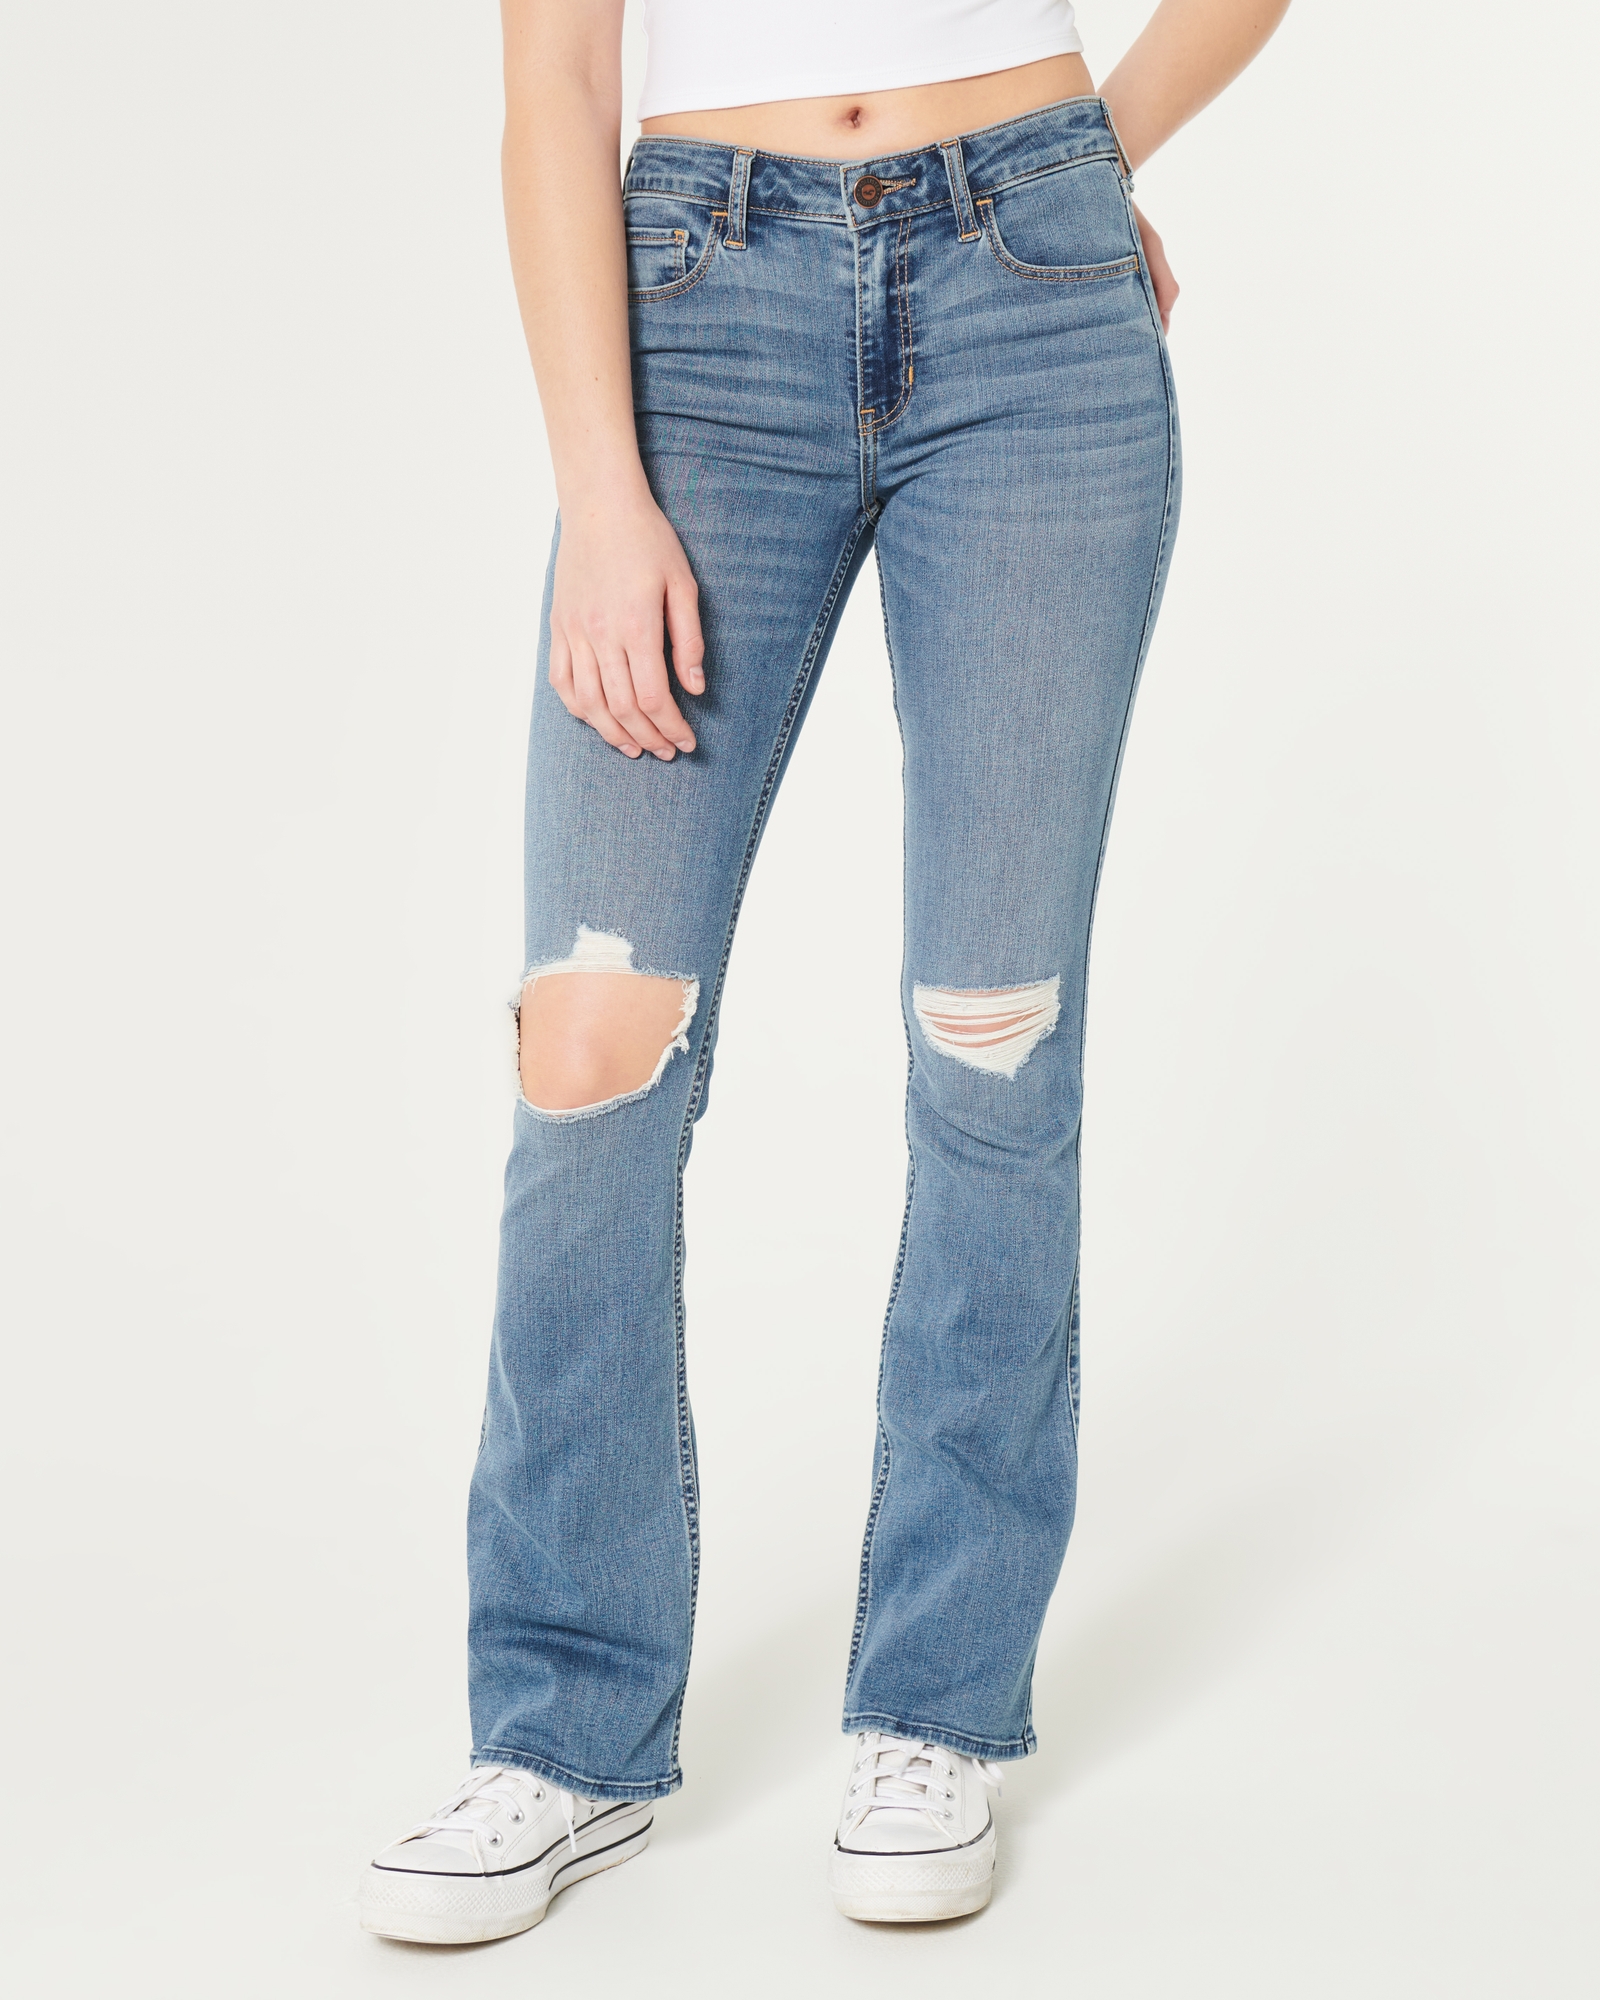 Women's Curvy Mid-Rise Ripped Medium Wash Boot Jeans